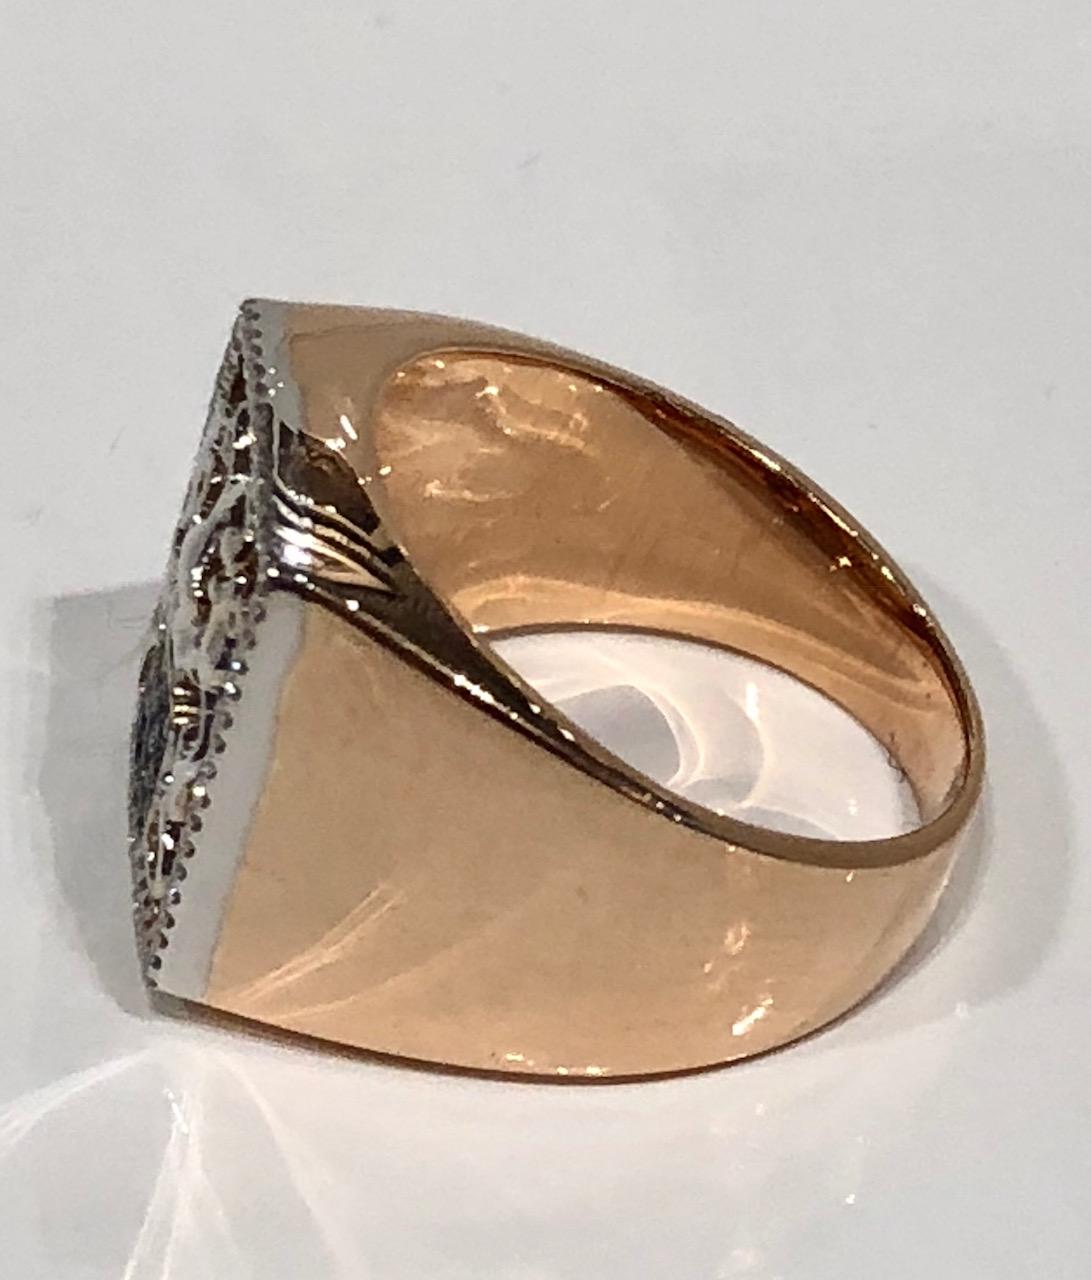 Unisex 18k rose gold Signet Ring with white and black diamond face. white gold detail relief ariund diamond set bezel
Designed by Martyn Lawrence Bullard
Available in any size, lead time 4 weeks